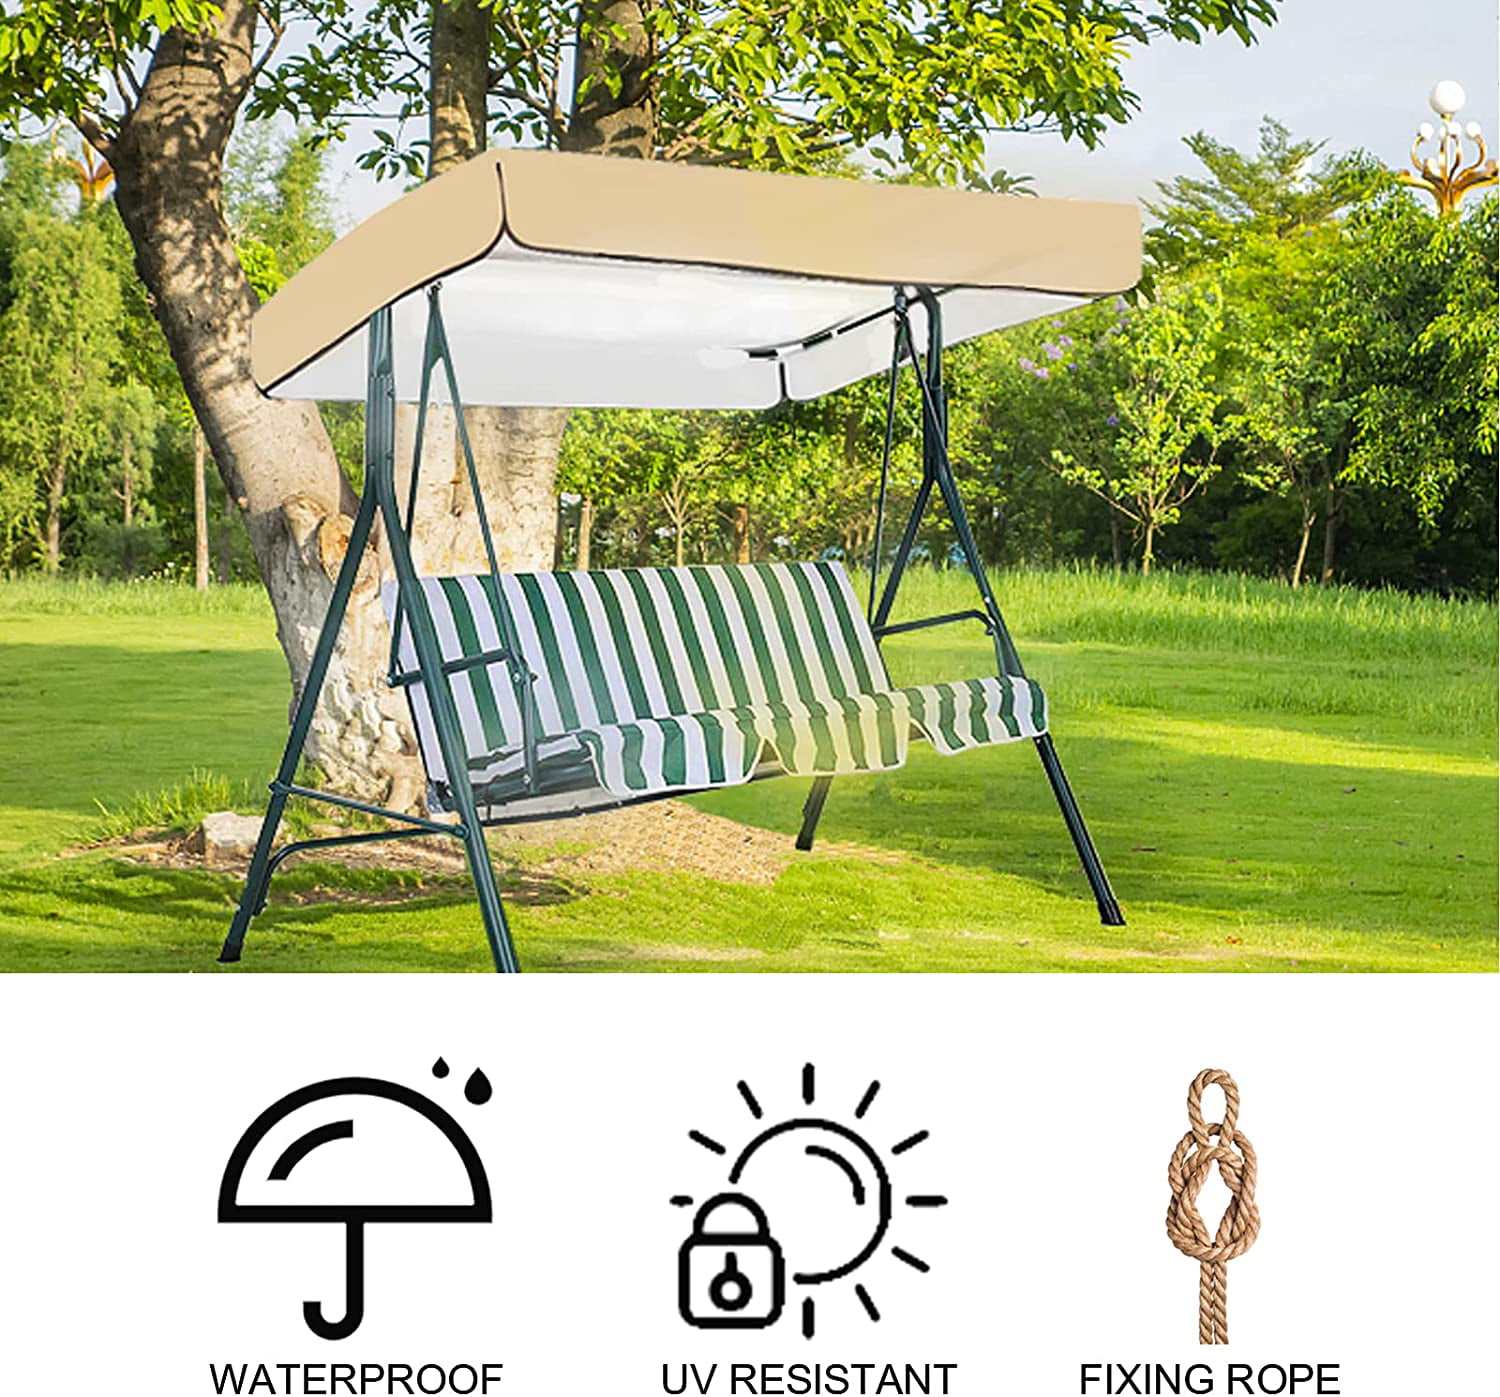 Patio Garden Outdoor 2 and 3 Seater Waterproof Hammock Cover Top for Leisure Universal Replacement Canopy for Garden Swing Chair Reading UV Protection Picnics